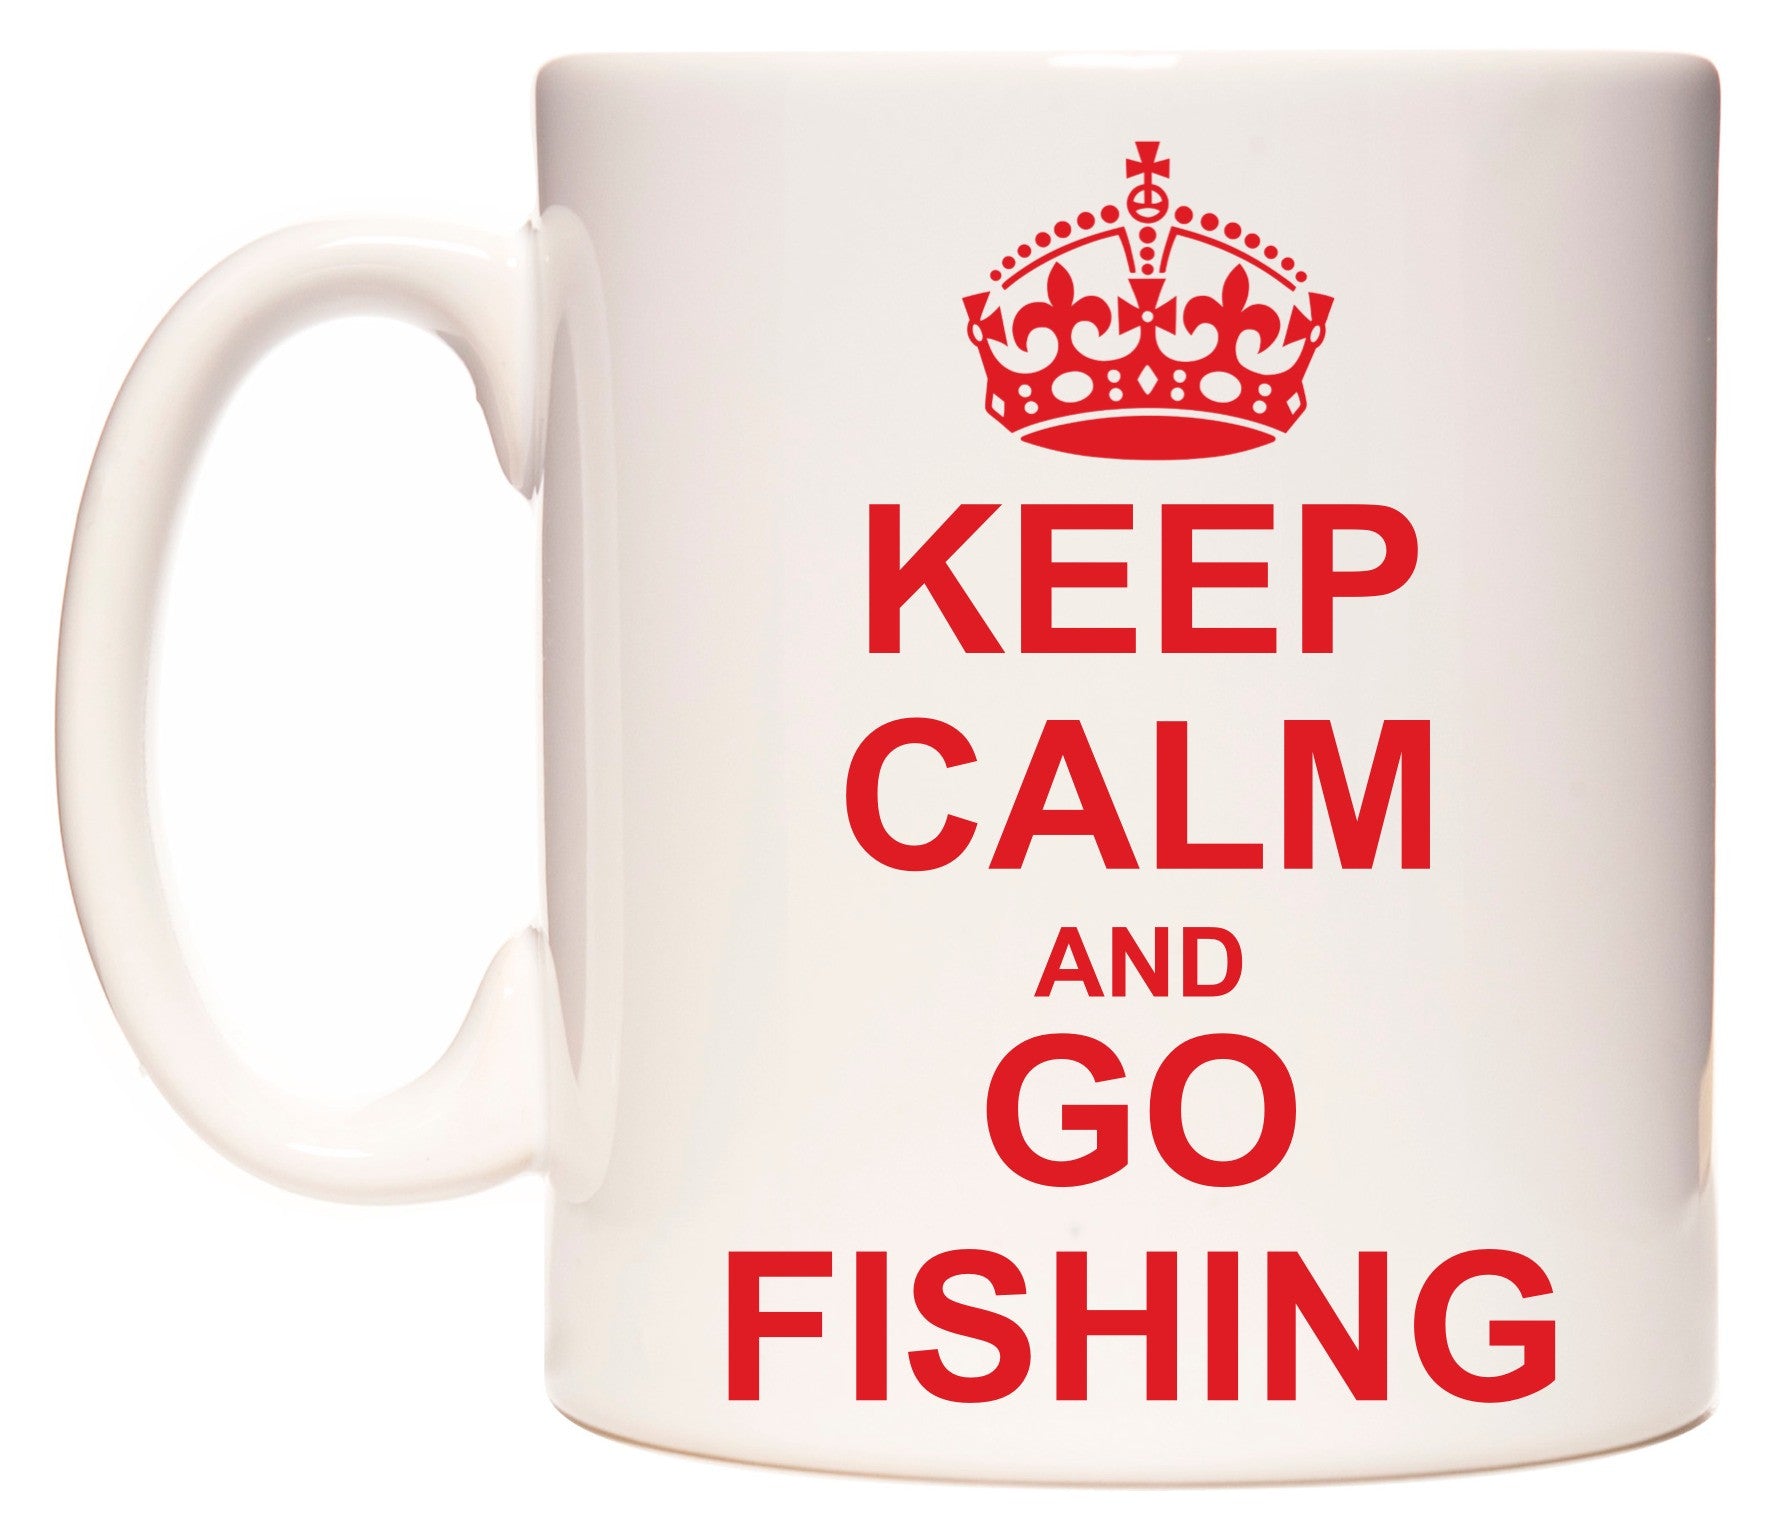 This mug features Keep Calm And Go Fishing